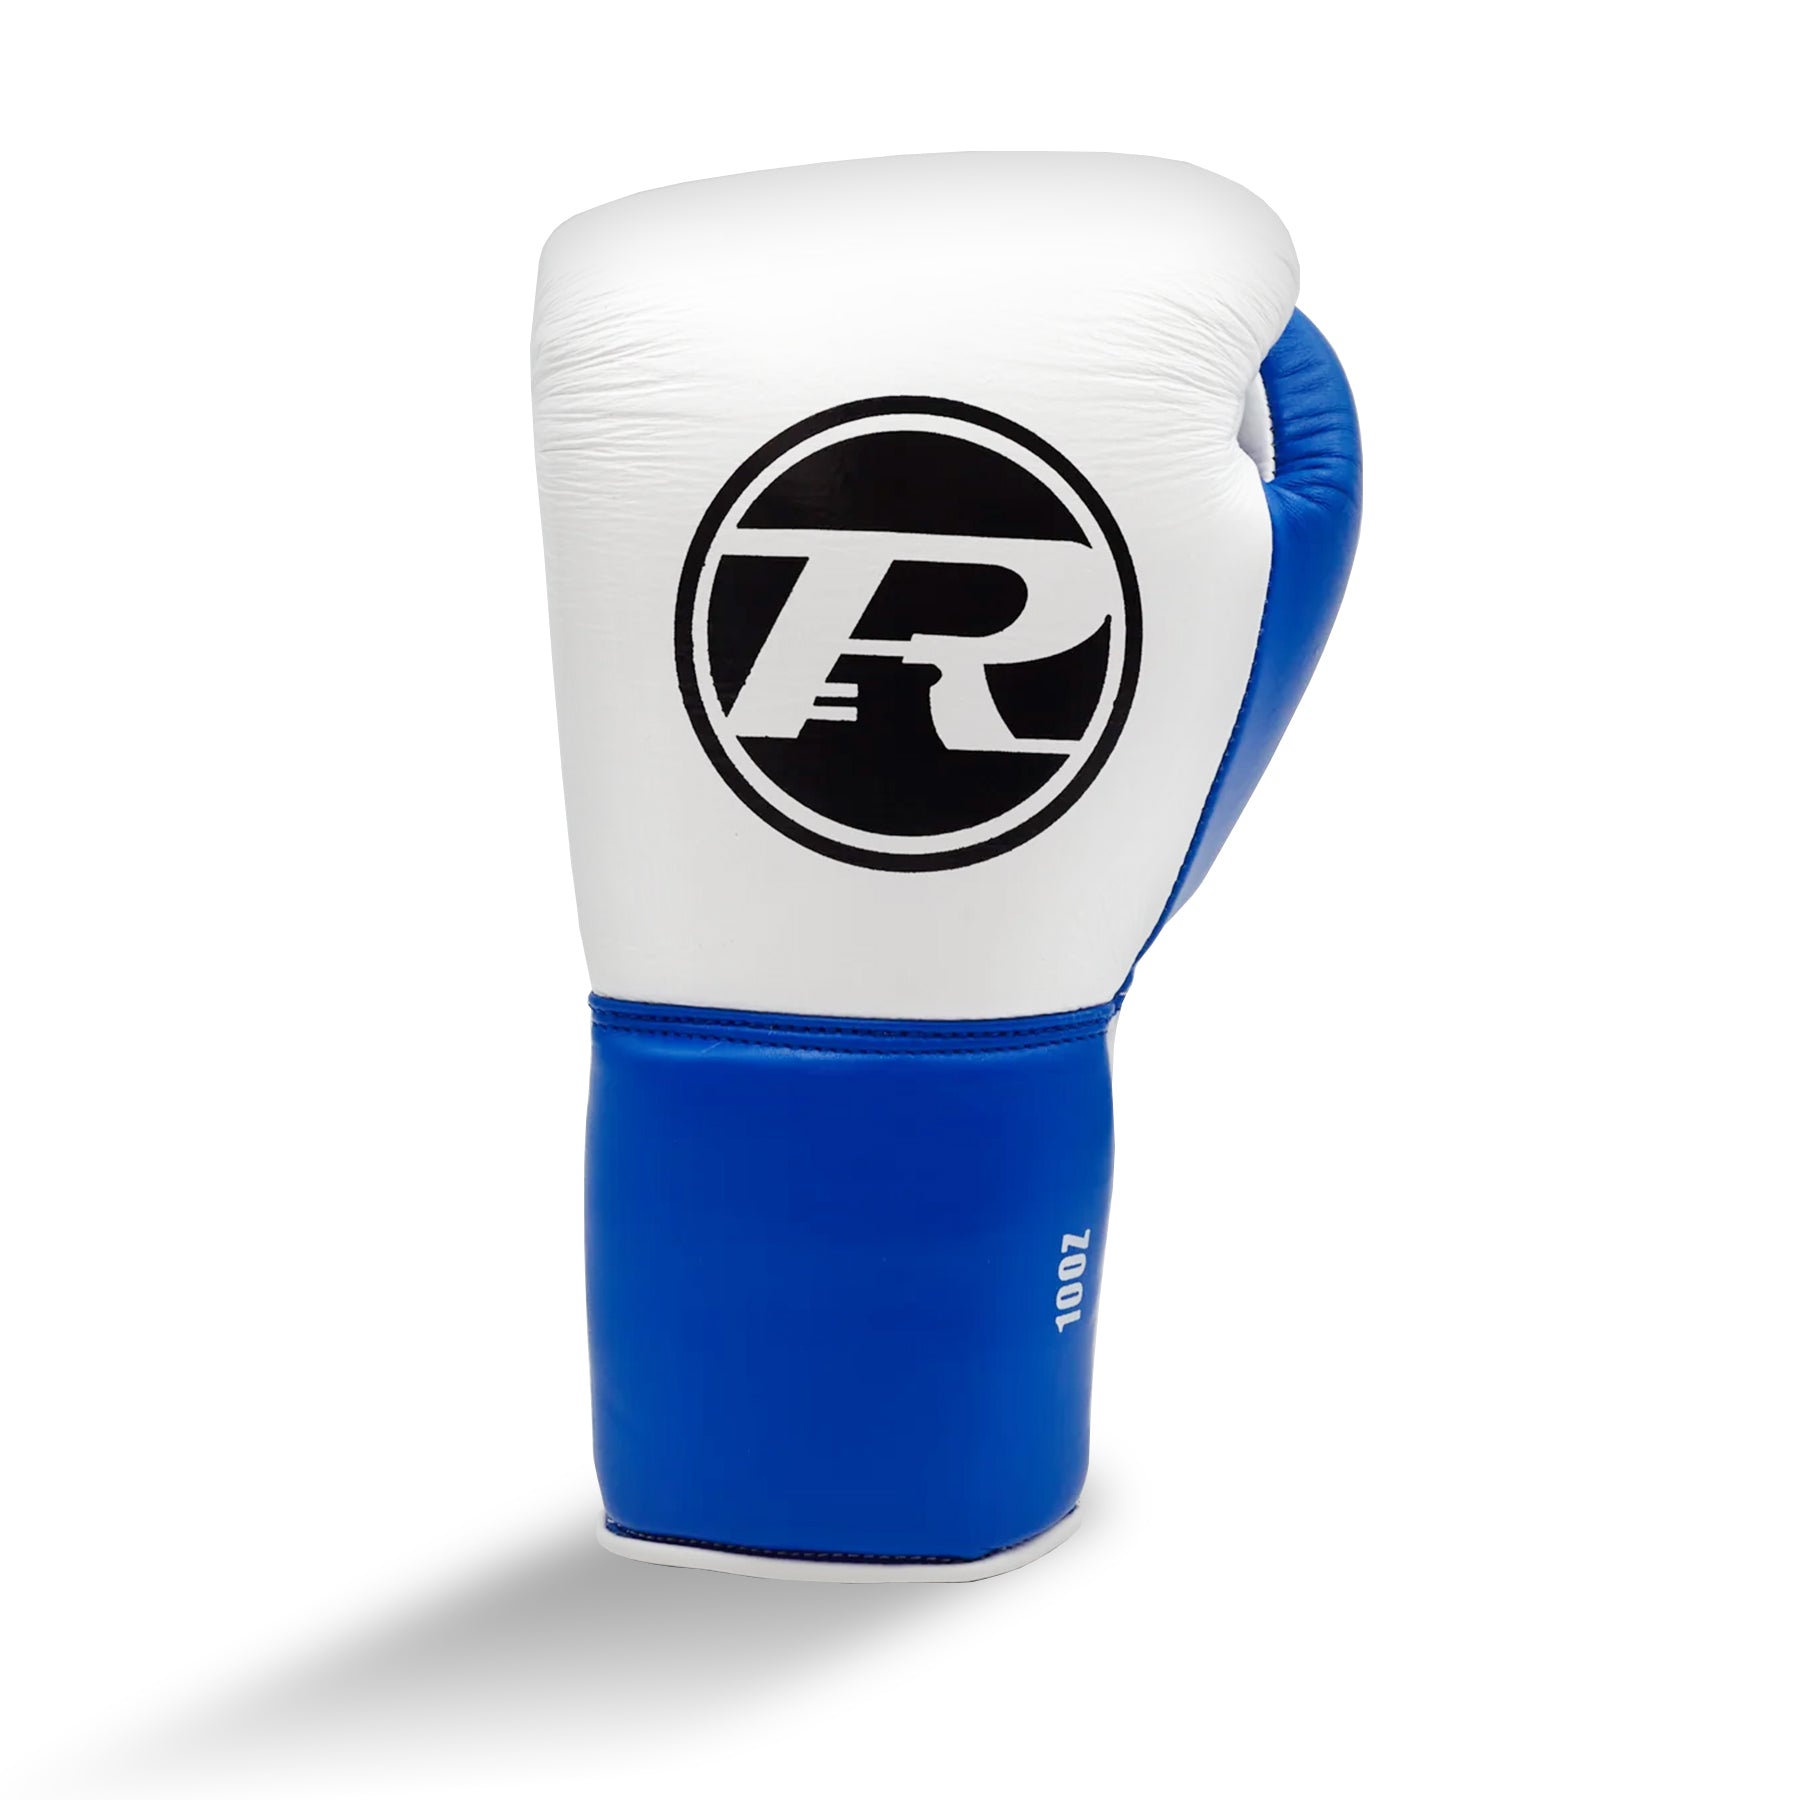 Ringside Boxing UK Pro Contest RS2 Boxing Gloves White / Blue Contest Gloves 